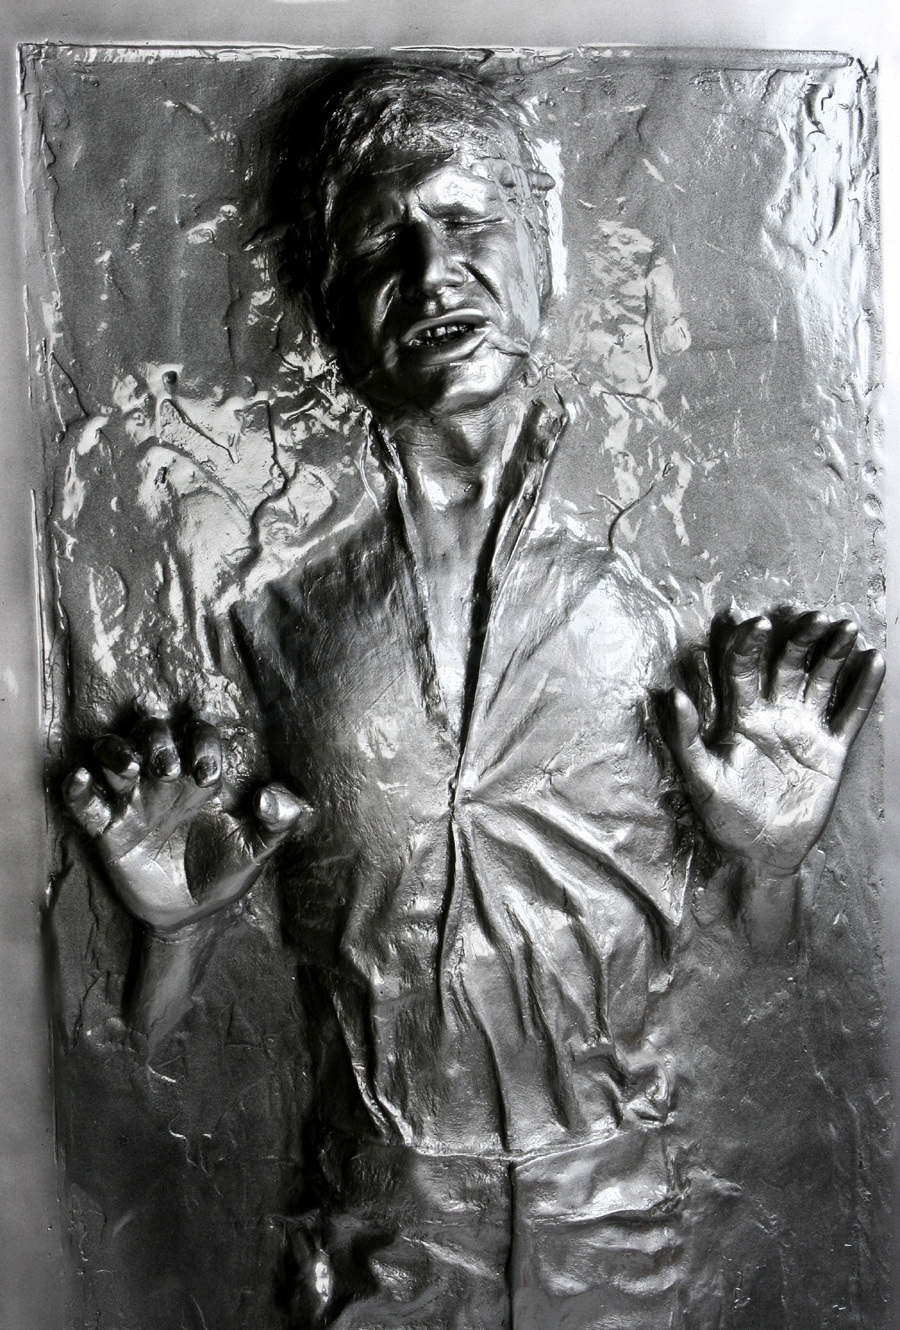 han solo trapped in carbonite